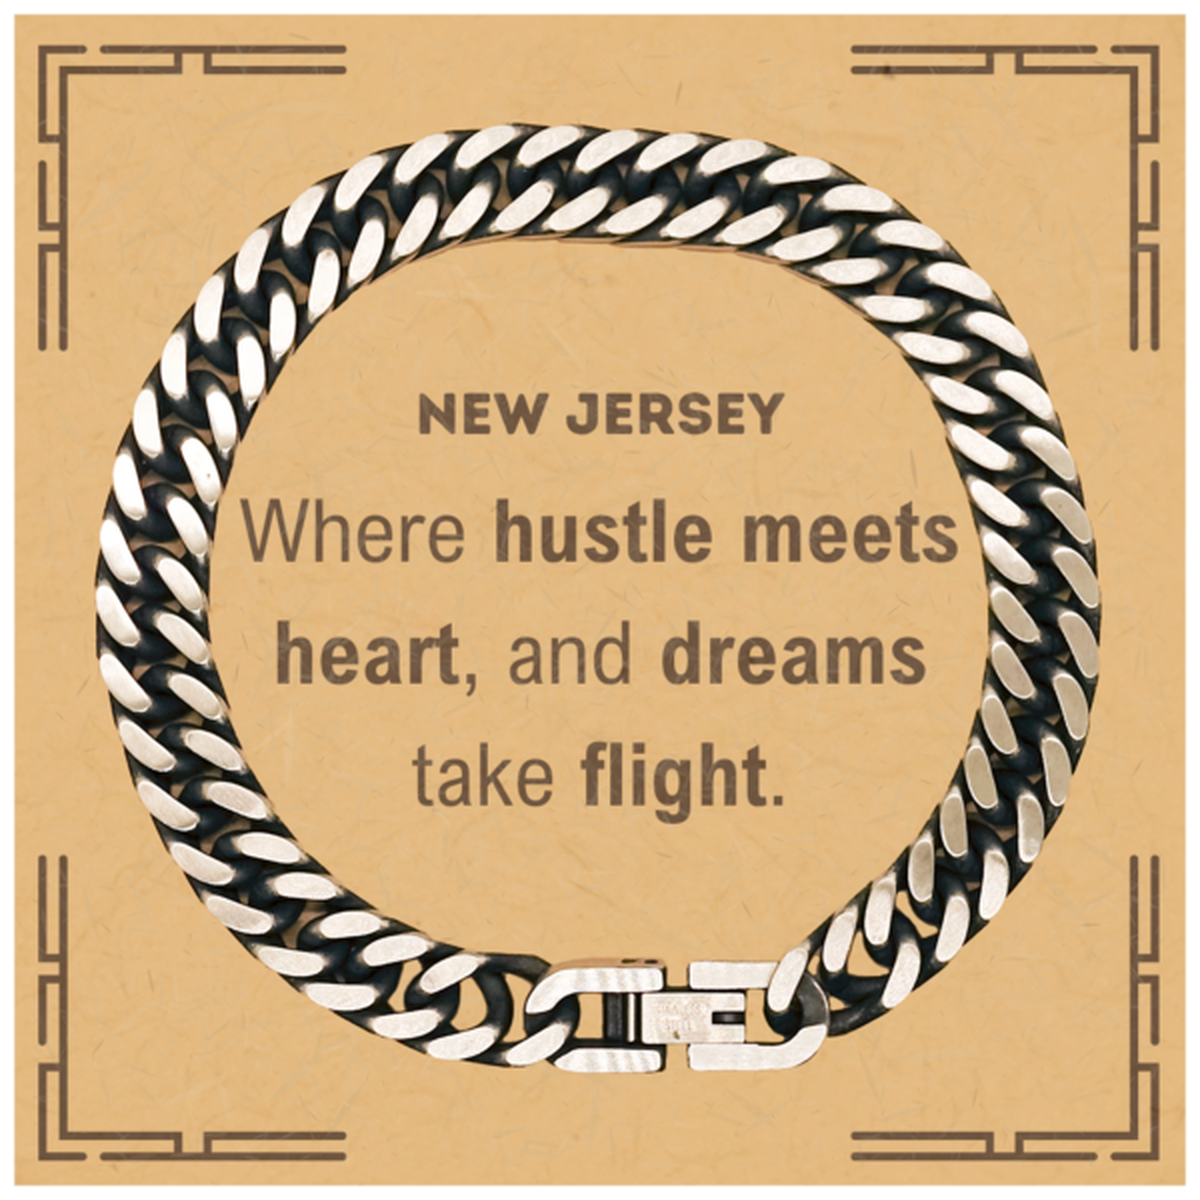 New Jersey: Where hustle meets heart, and dreams take flight, New Jersey Card Gifts, Proud New Jersey Christmas Birthday New Jersey Cuban Link Chain Bracelet, New Jersey State People, Men, Women, Friends